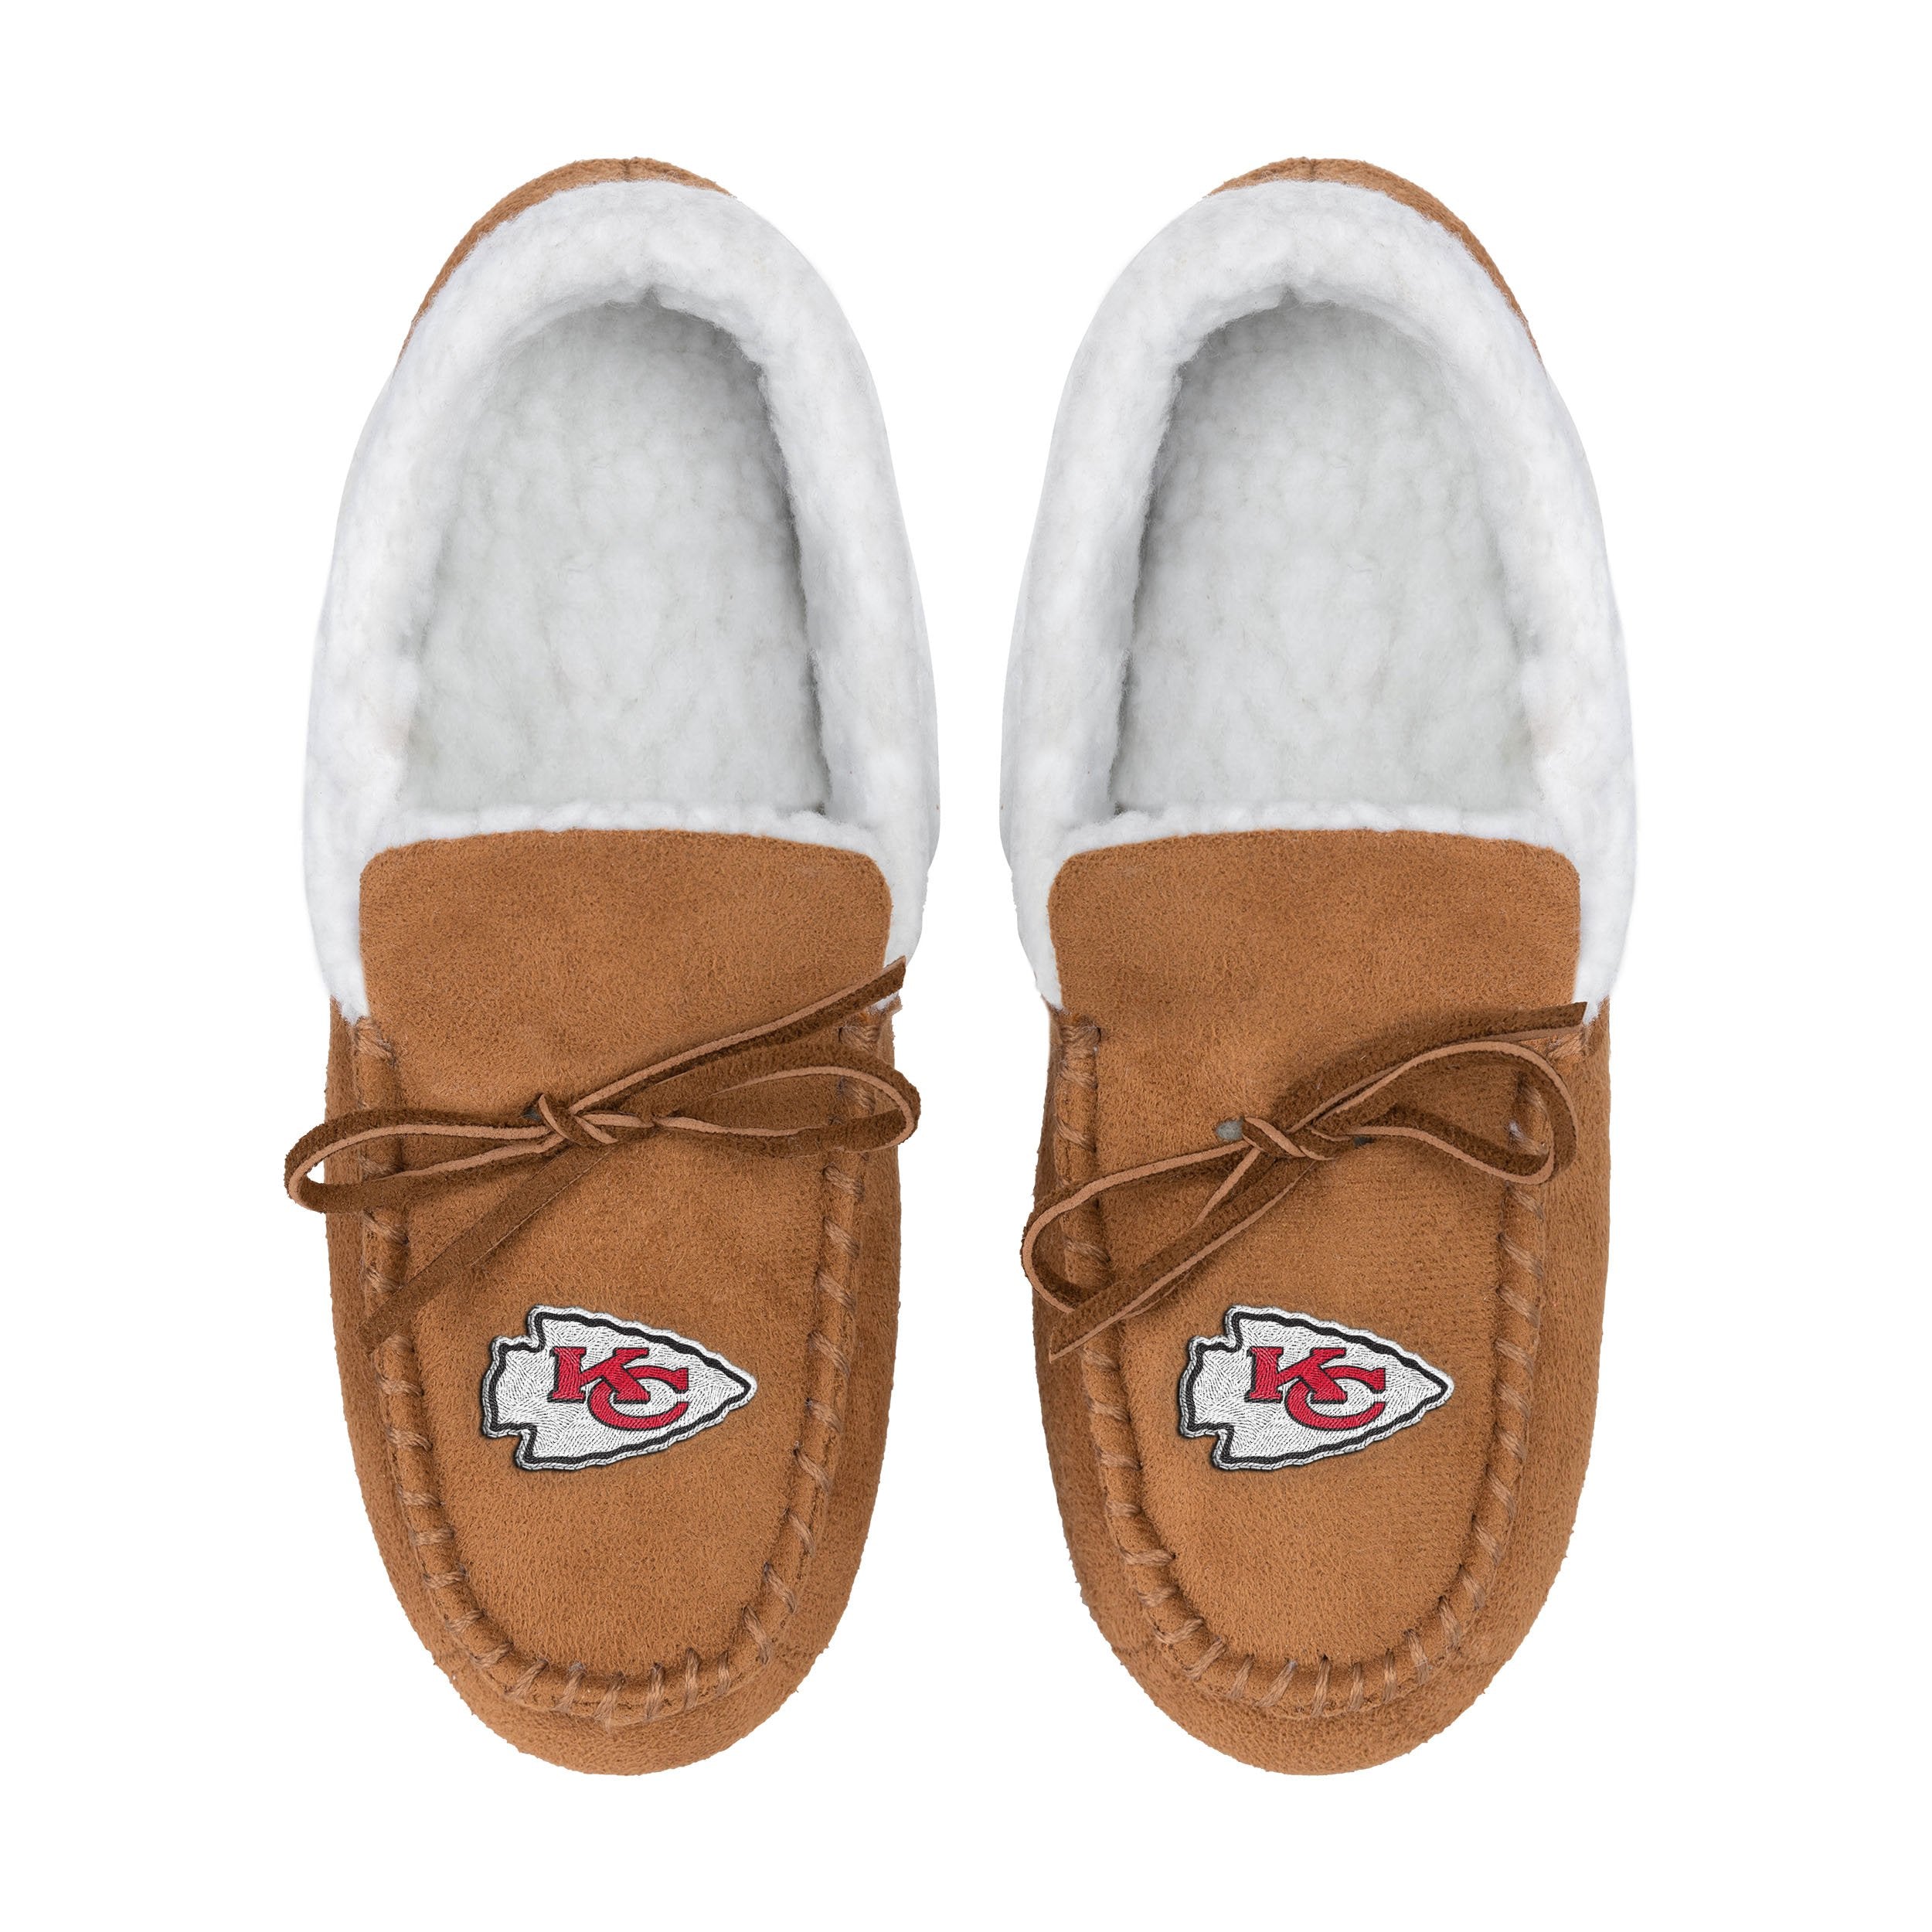 NFL Tan Moccasin Slippers - Pick Team!